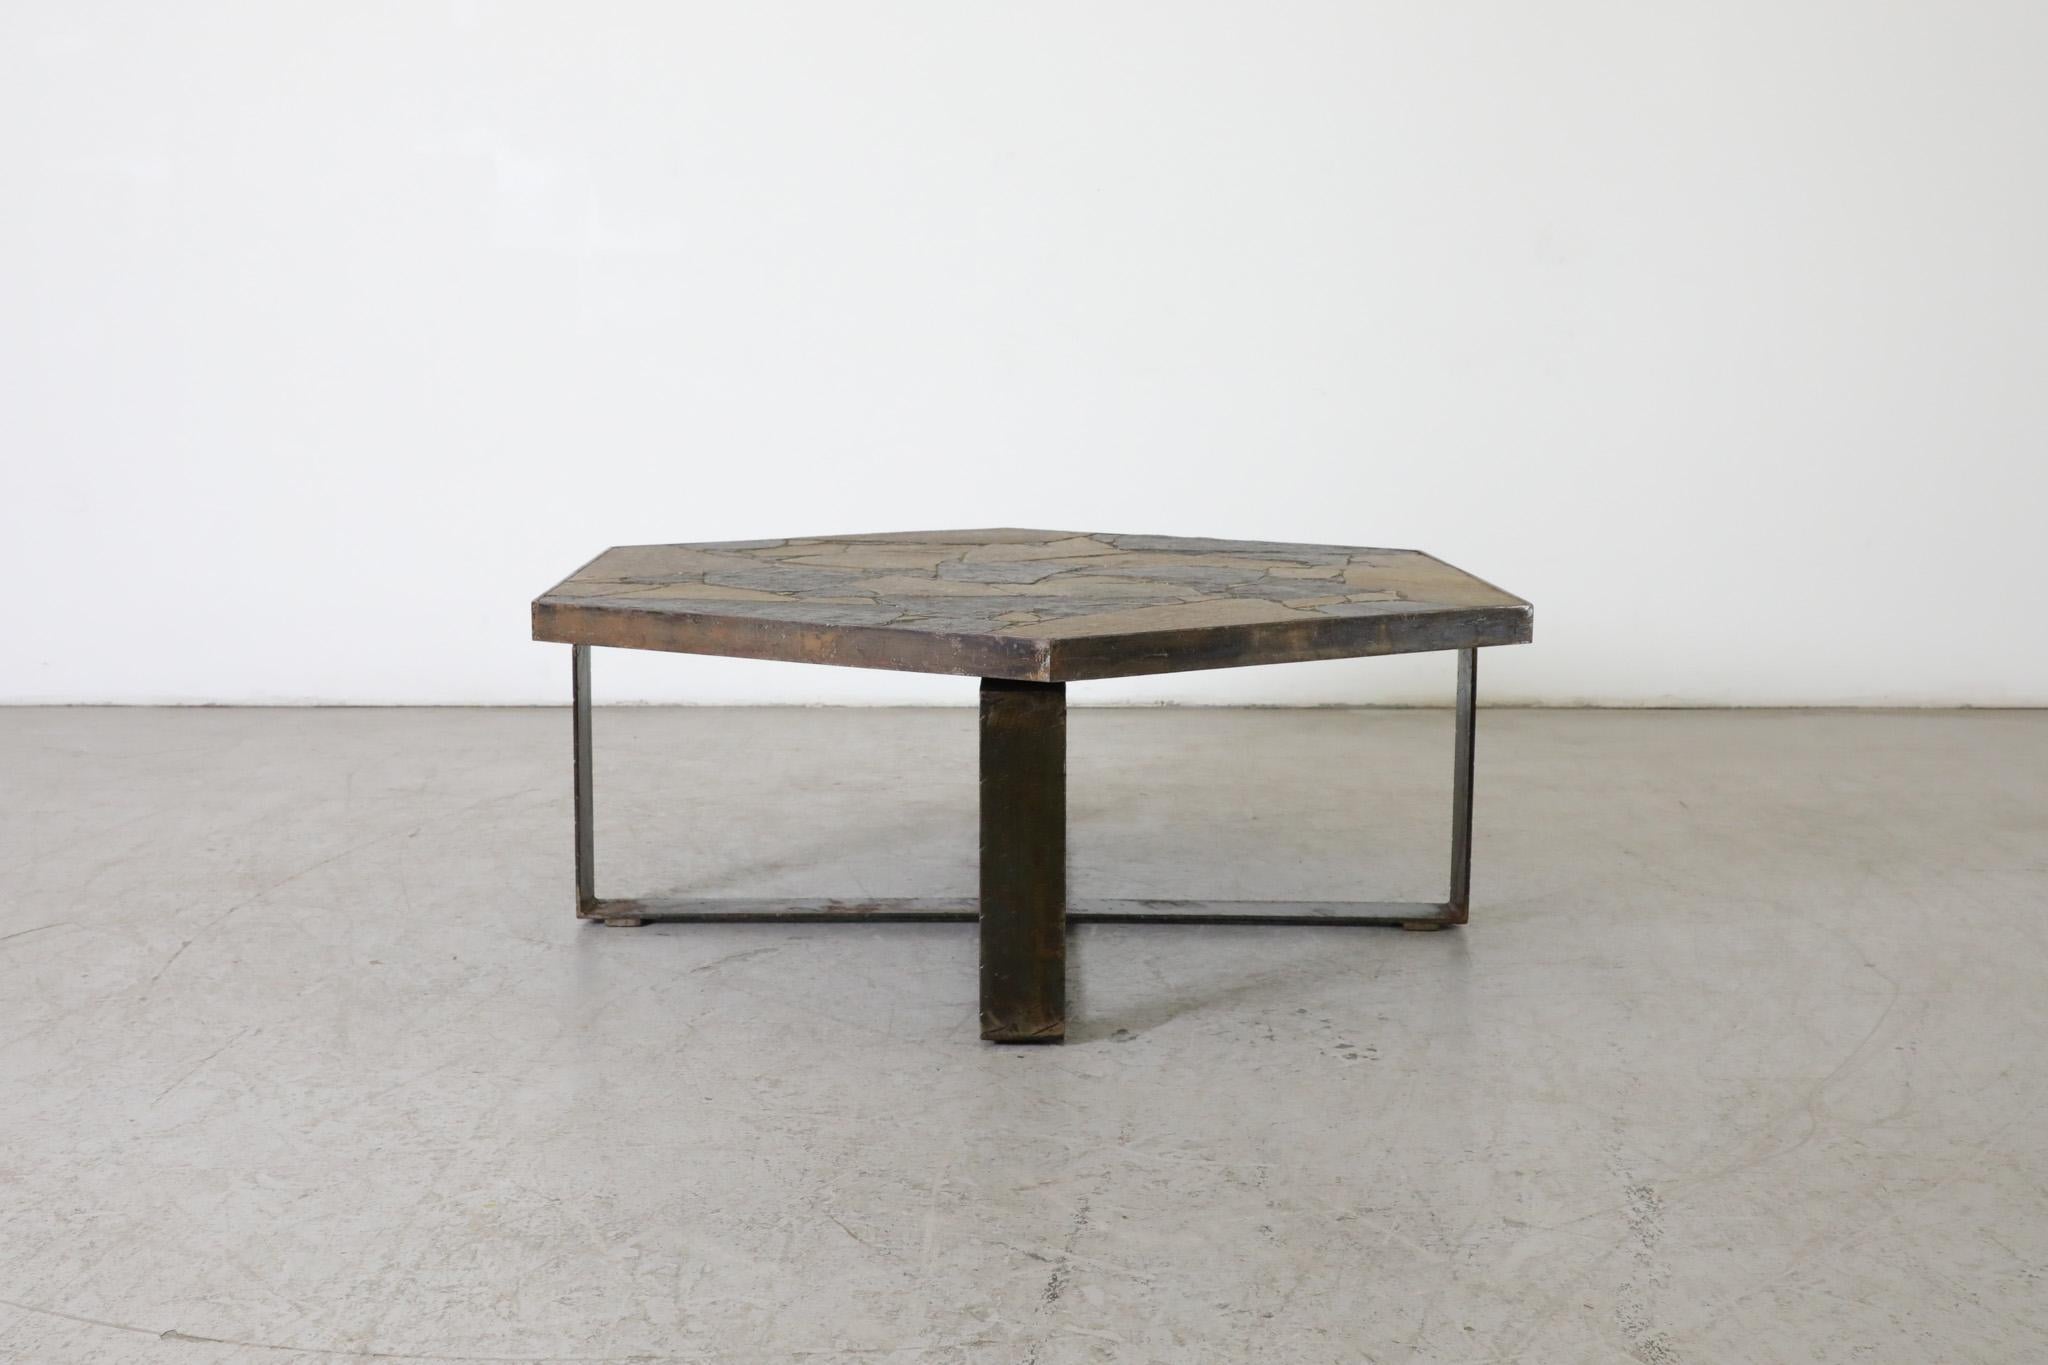 Innovative Dutch designer Paul Kingma is credited with creating this style of Mid-Century coffee table made of concrete, slate, and glacial stone. In this excellent Brutalist and architectural example, a thick steel frame supports an hexagonal top,